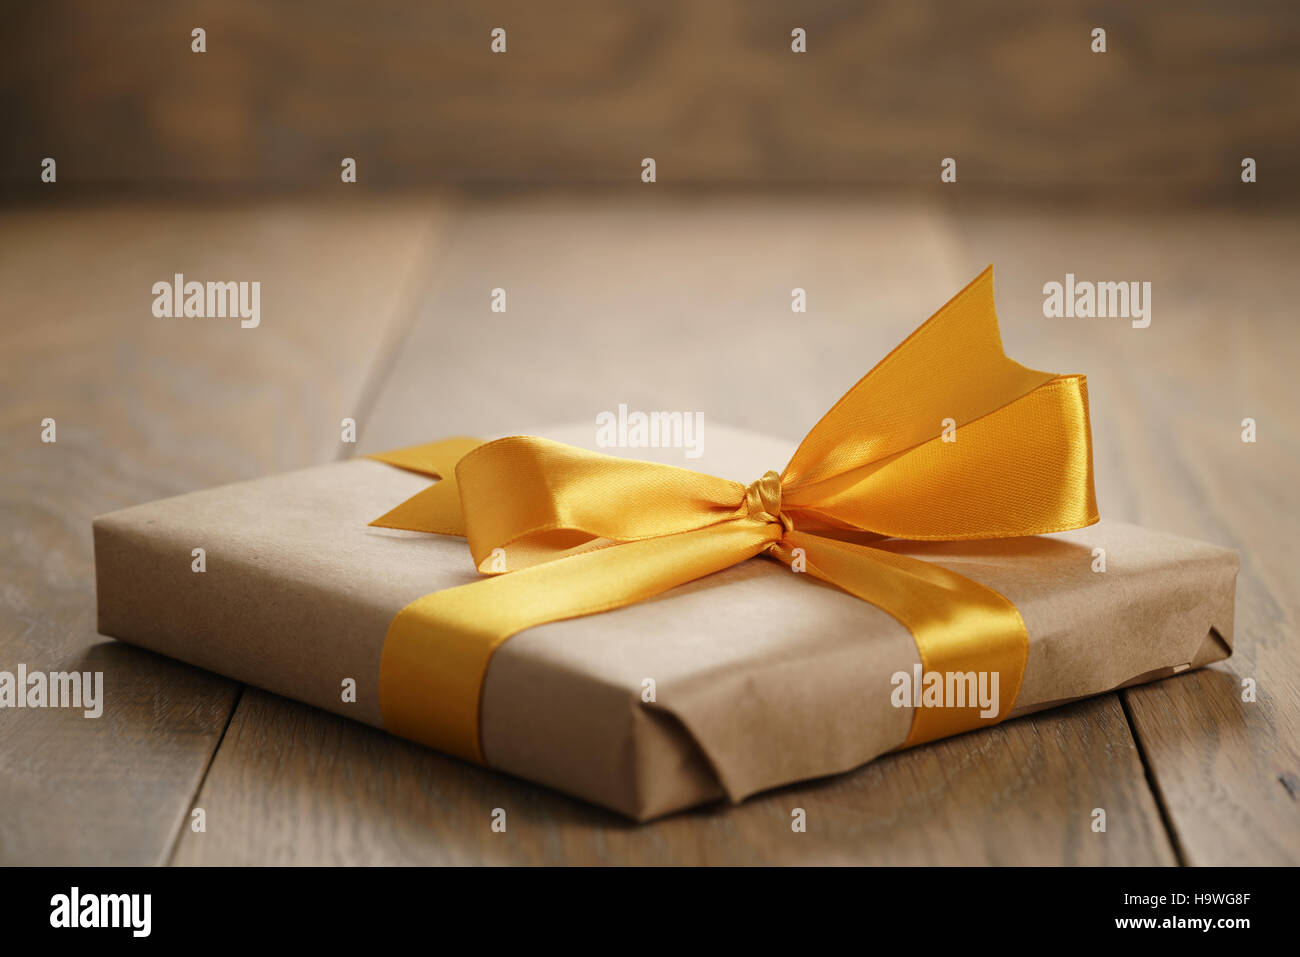 rustic craft paper gift box with orange ribbon bow on wood table Stock Photo